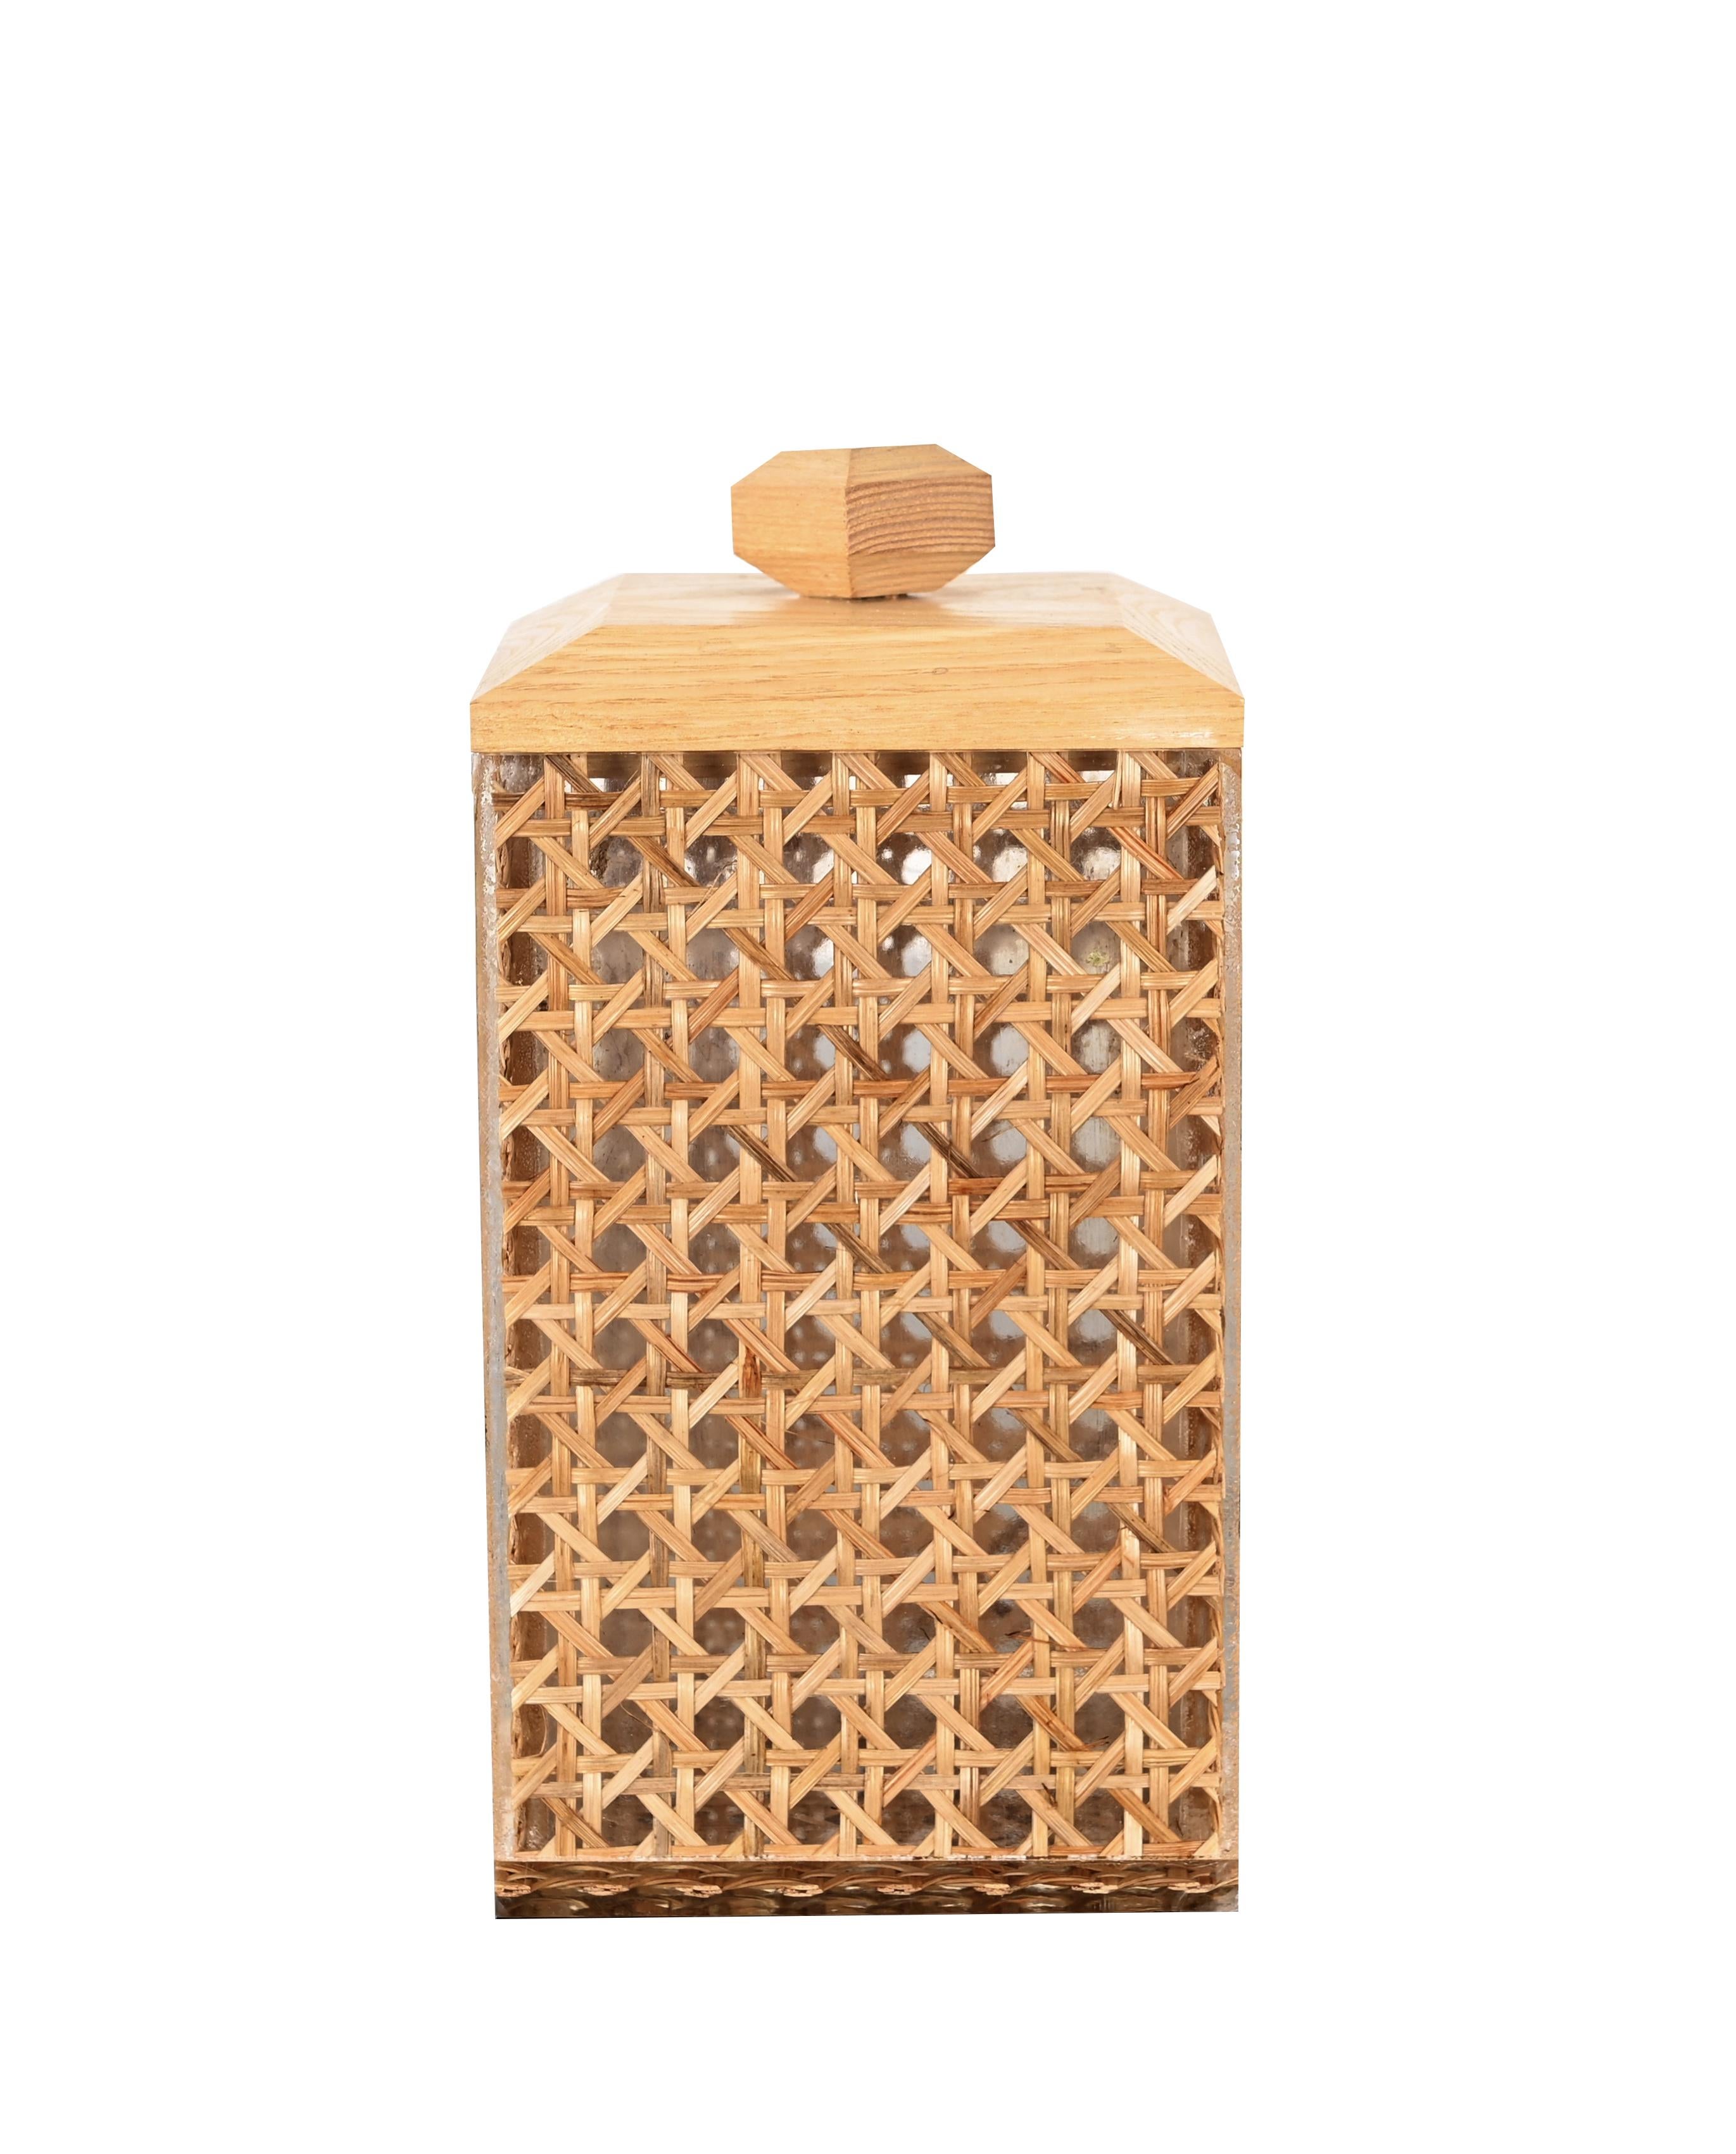 Wicker, Lucite an Wood Decorative Box, Christian Dior Style, Italy 1970s  For Sale 2